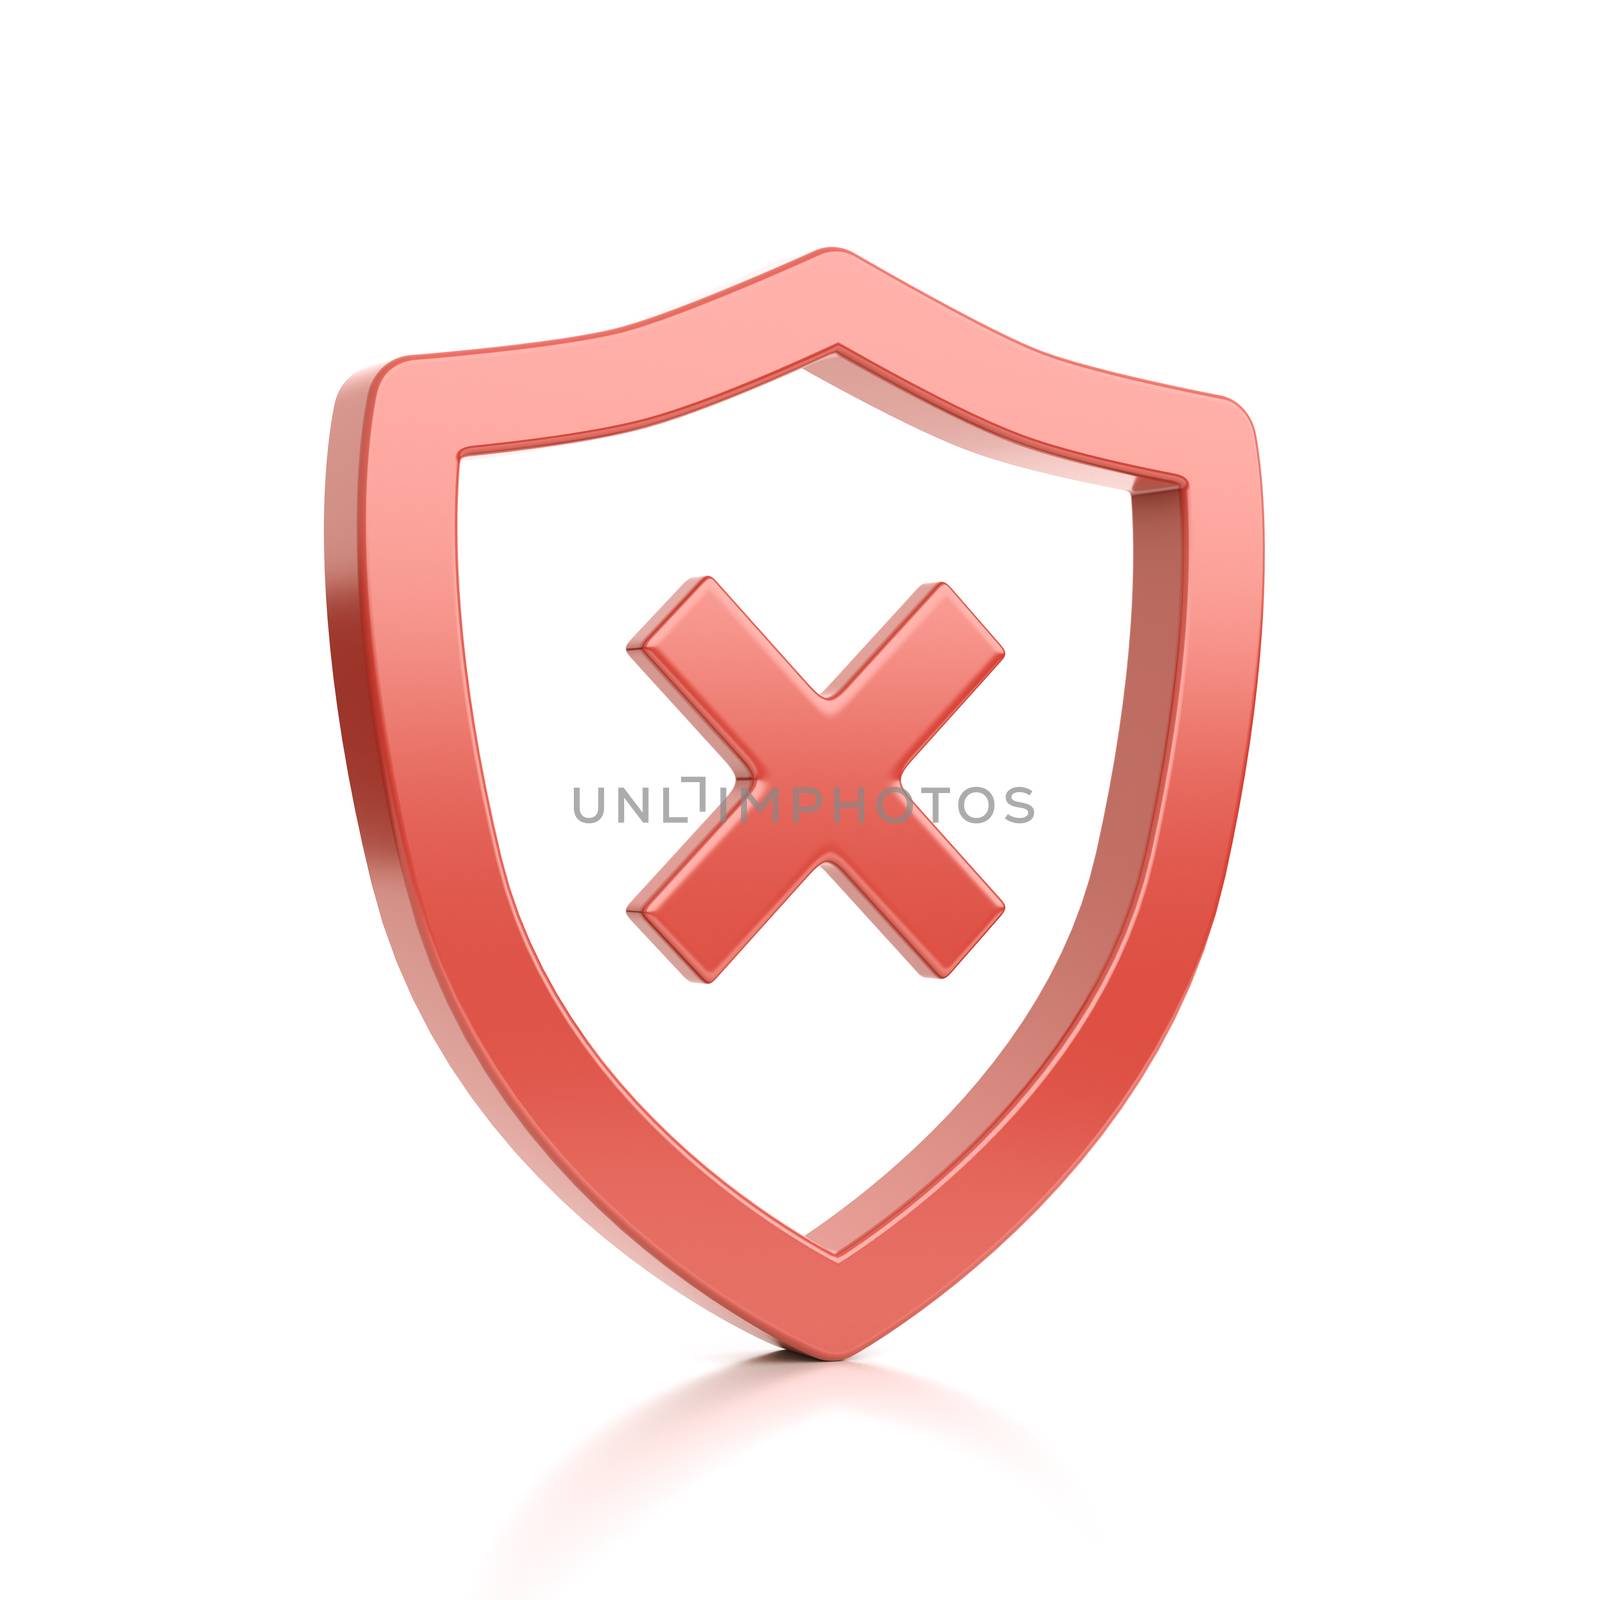 Red Outline Shield Shape with Cross on White Background 3D Illustration